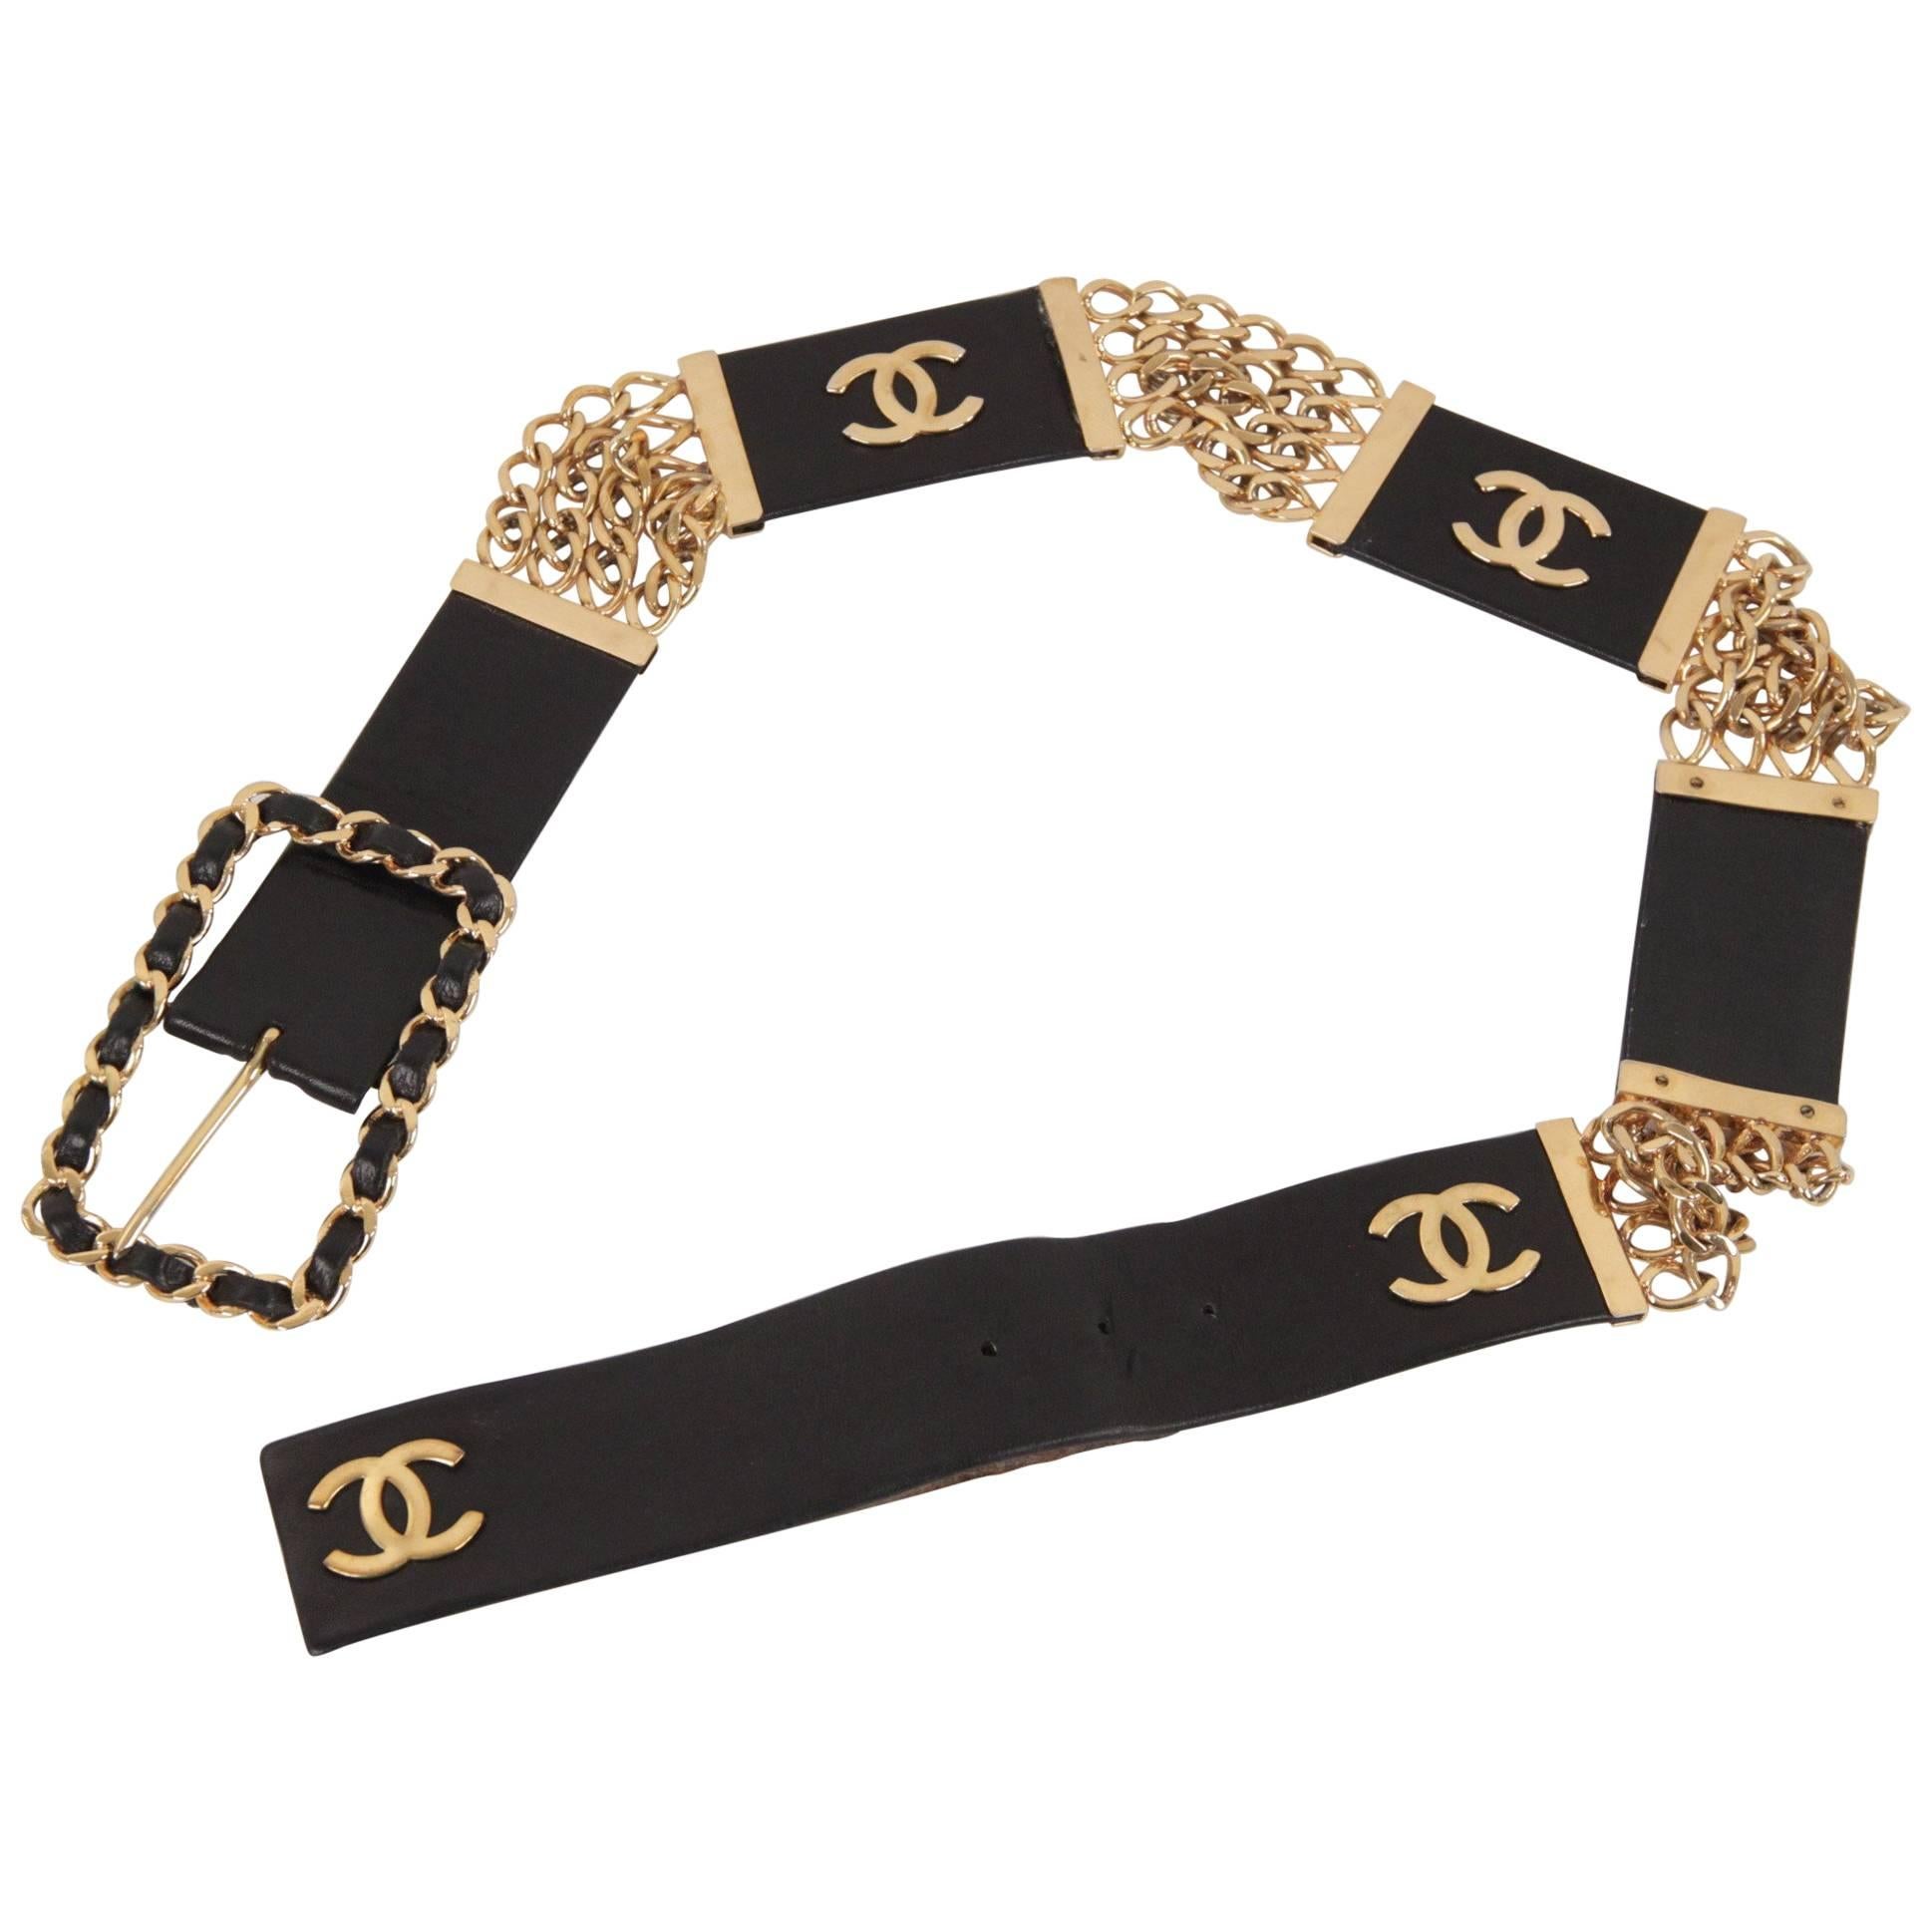 Chanel Vintage Gold Metal and Black Leather Belt CC Logo Chain Buckle Size 70/28